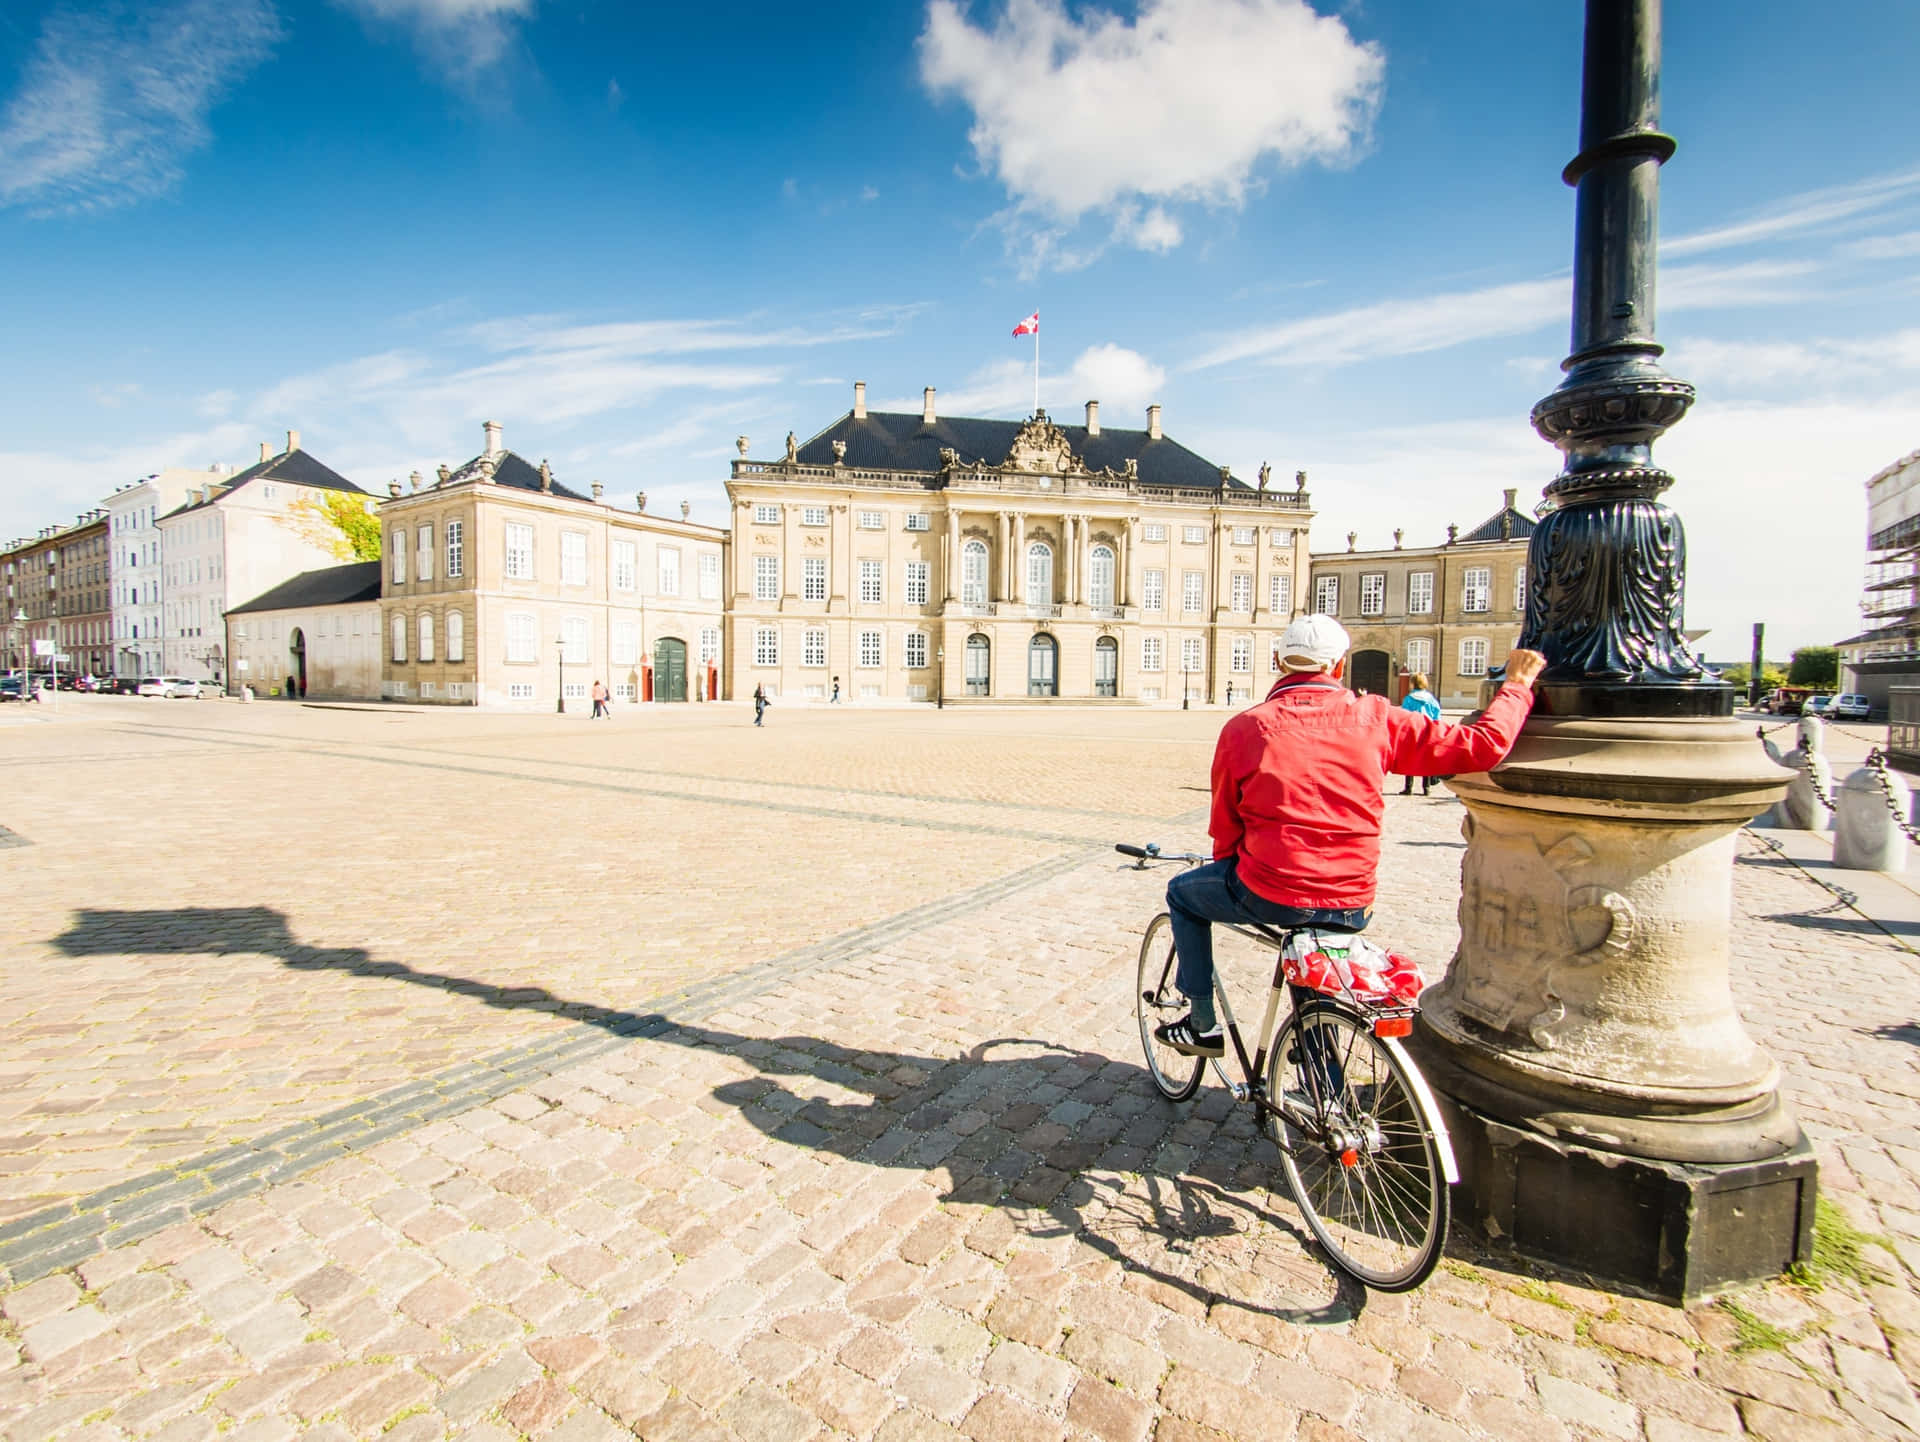 Man In Red In Amalienborg Palace Wallpaper